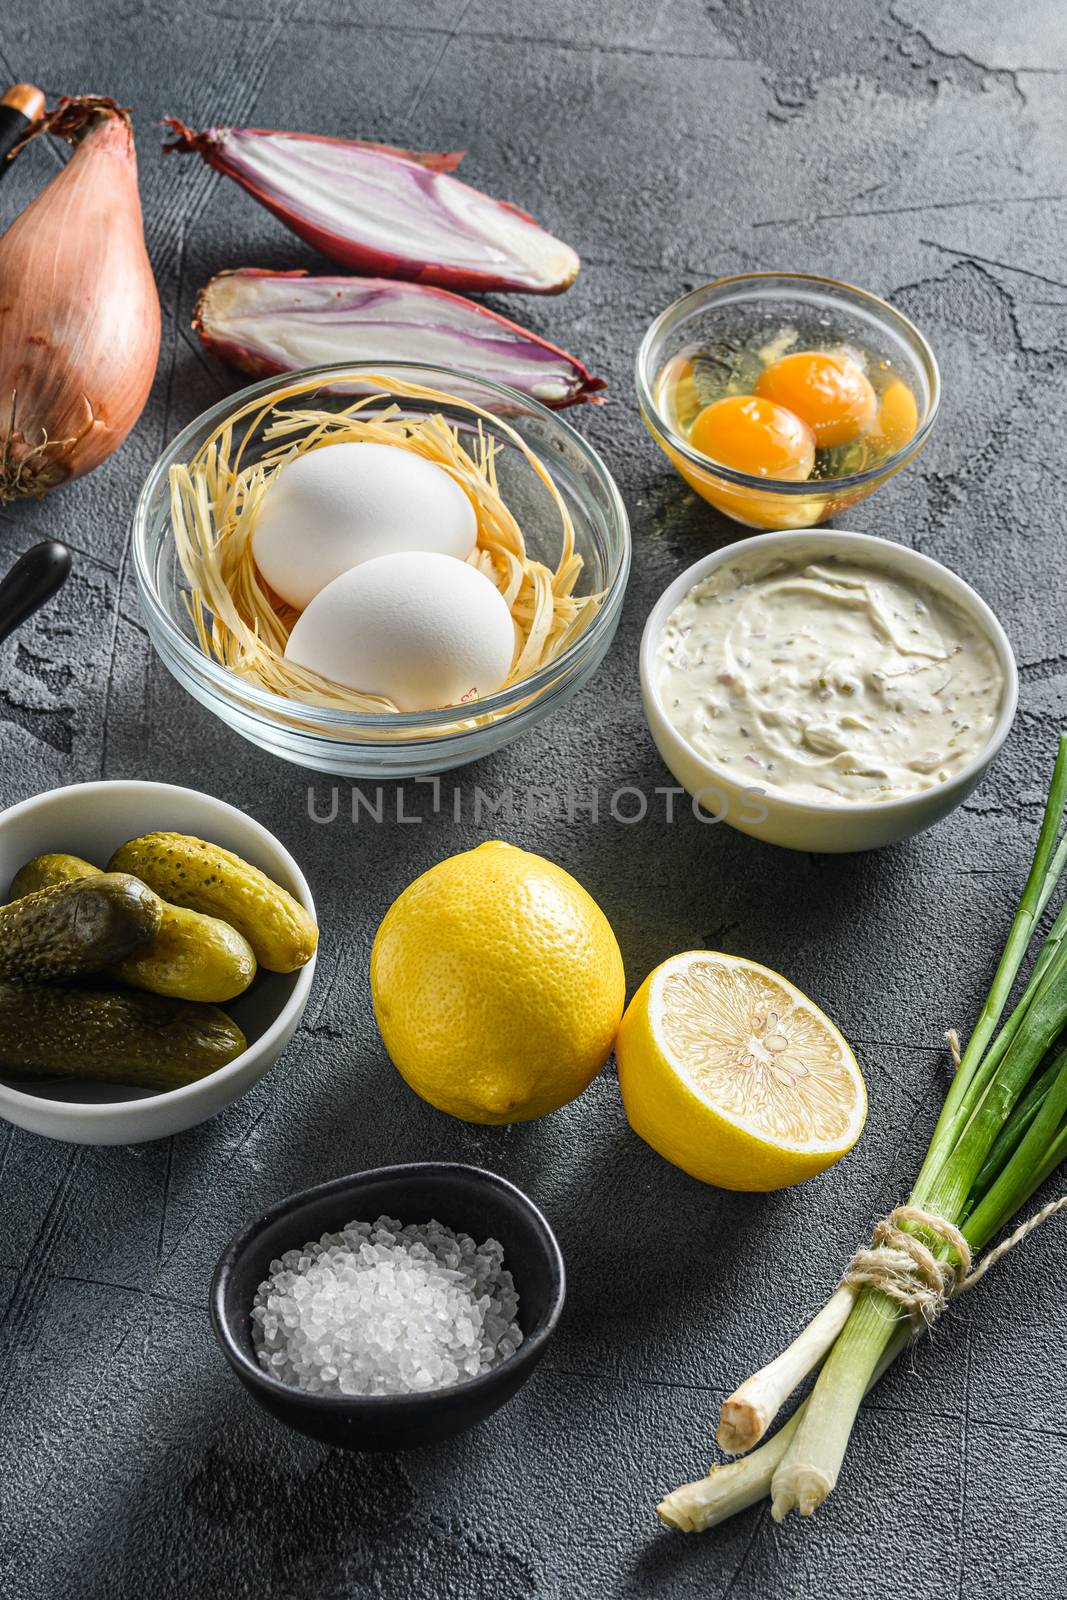 Ranch sauce in a white porcelain bowl with ingredients eggs capers,vegetables, herbs and spices on an grey stone textured table side view by Ilianesolenyi